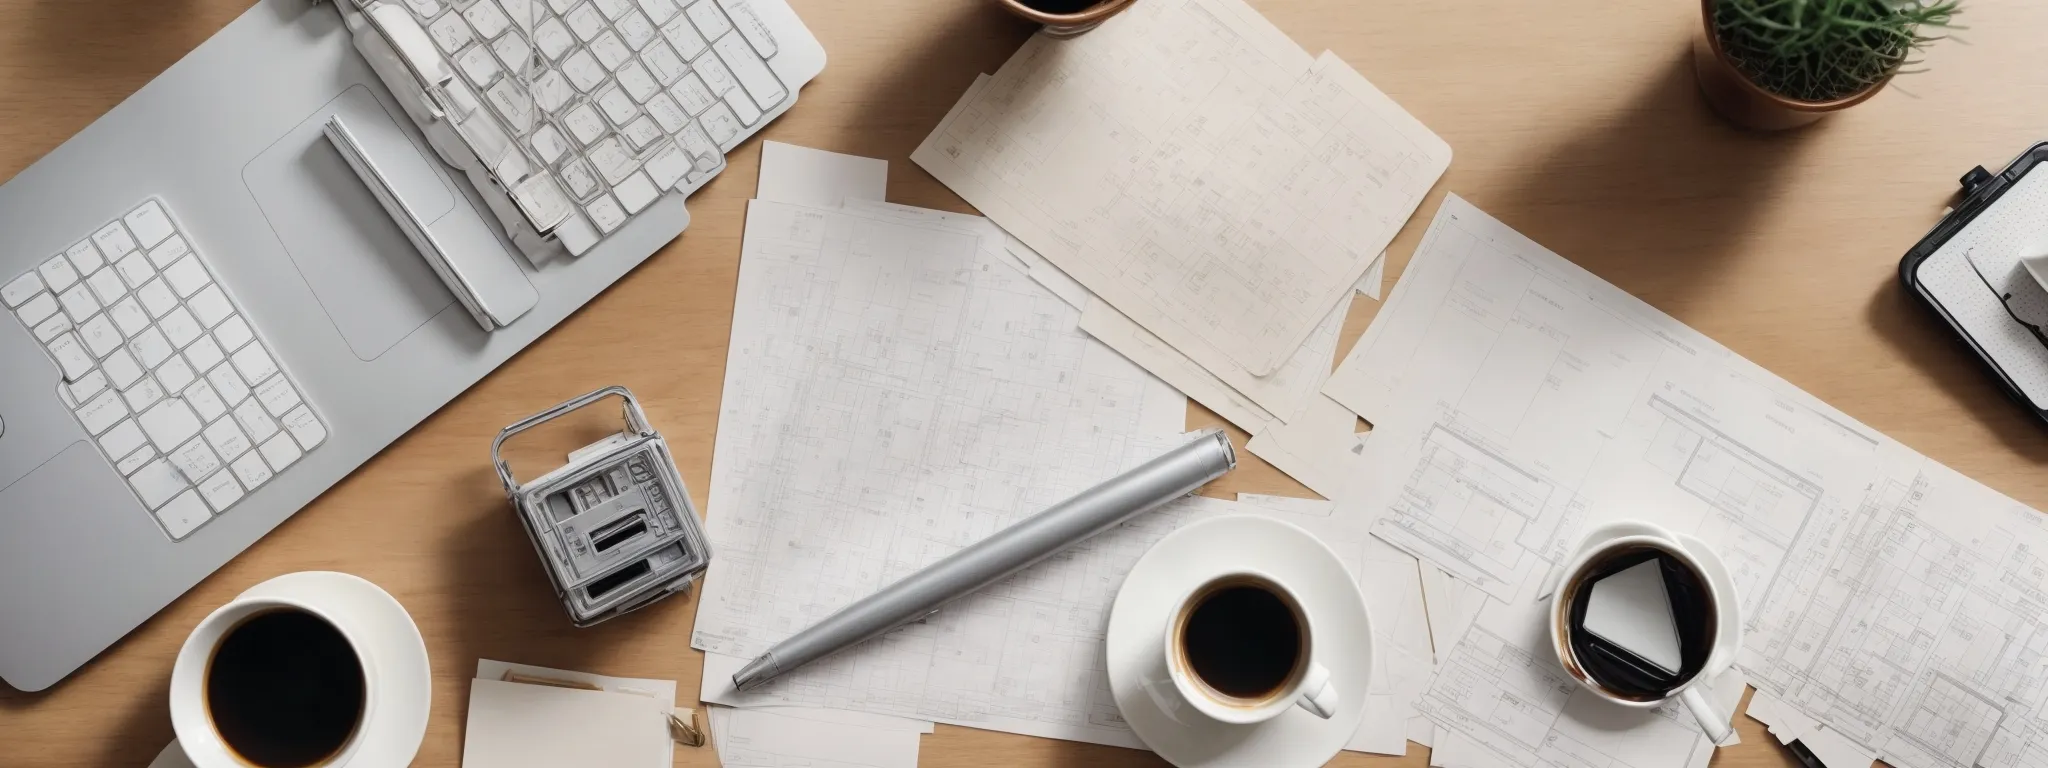 a top-down view of a neatly organized workspace with an open laptop, a notepad, and a coffee cup amidst the conceptual blueprints of website wireframes.